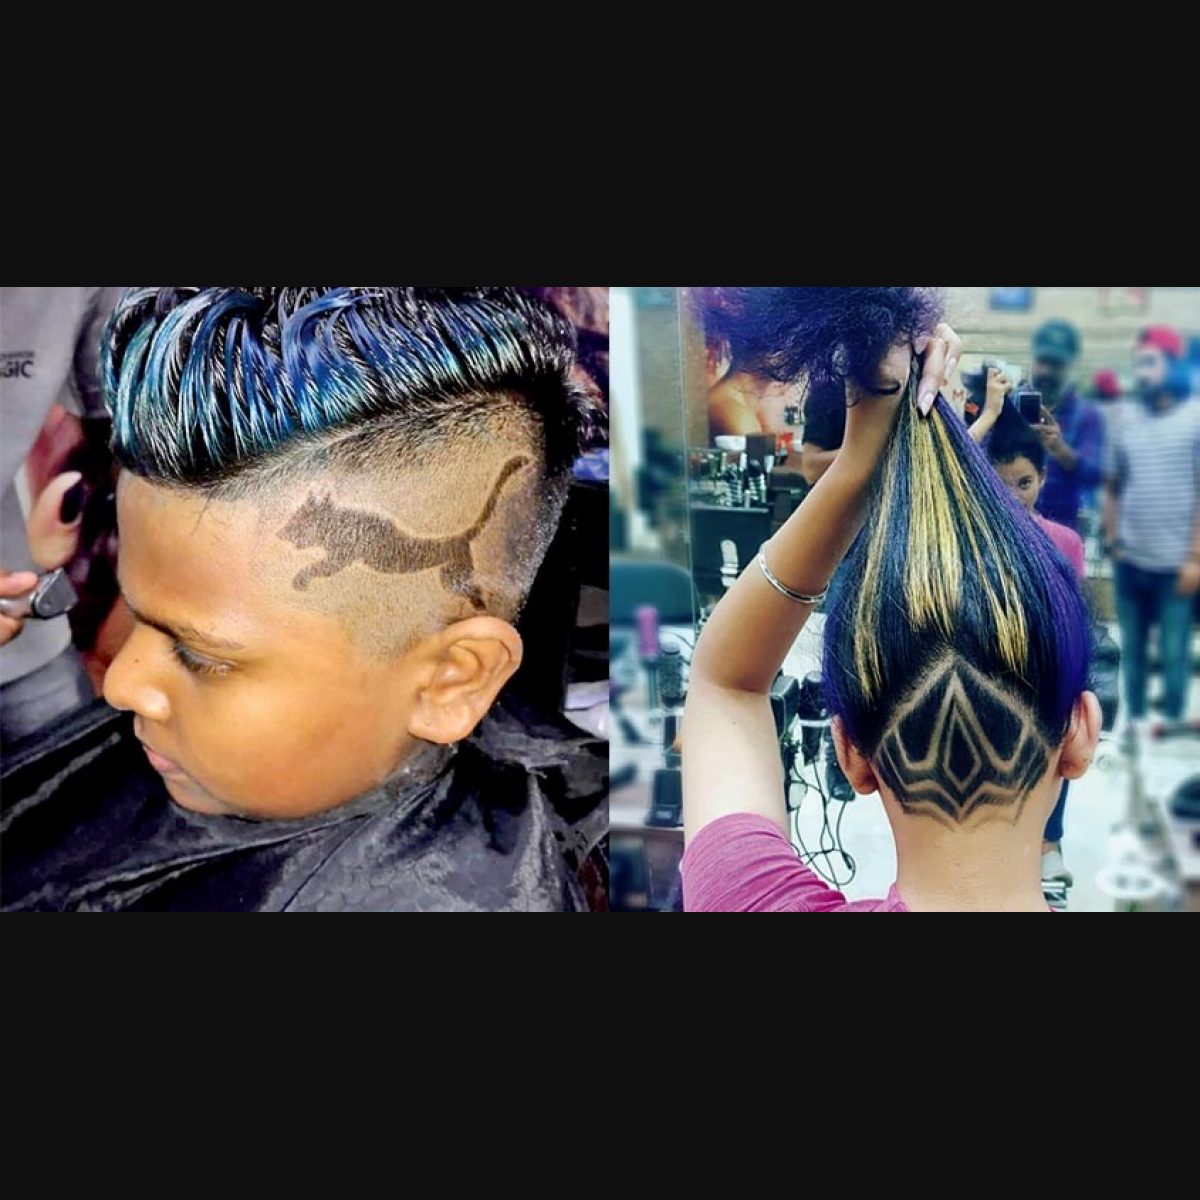 Aggregate 92+ about new hair style tattoo super cool .vn